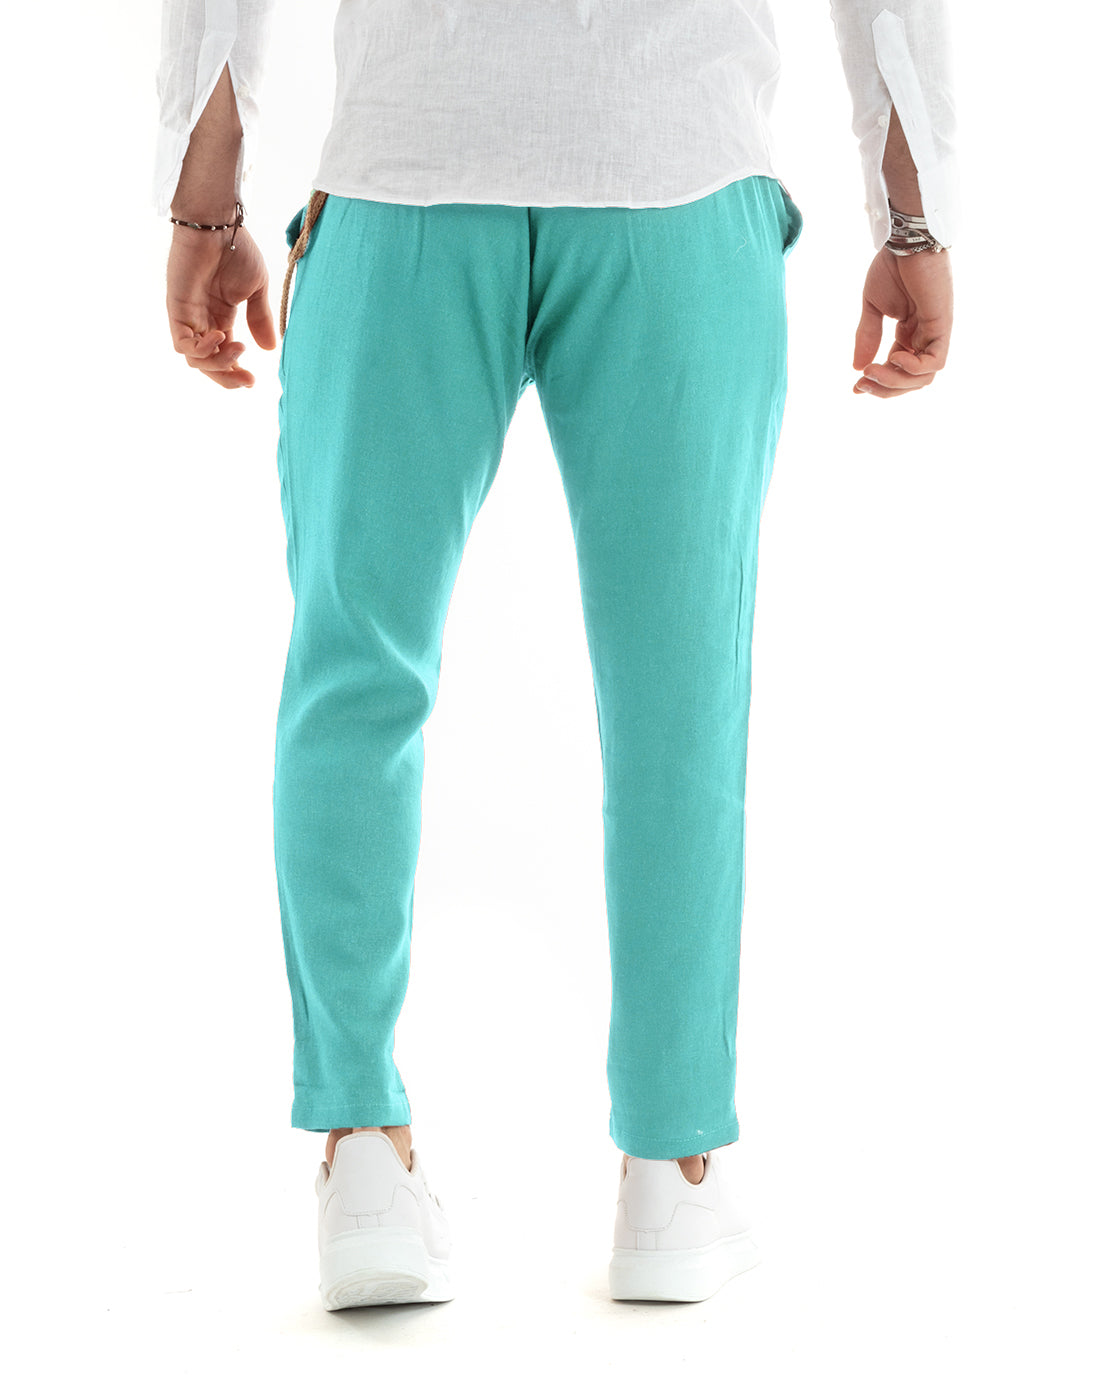 Long Men's Trousers Solid Color Turquoise Linen Button Casual Classic GIOSAL-P5802A